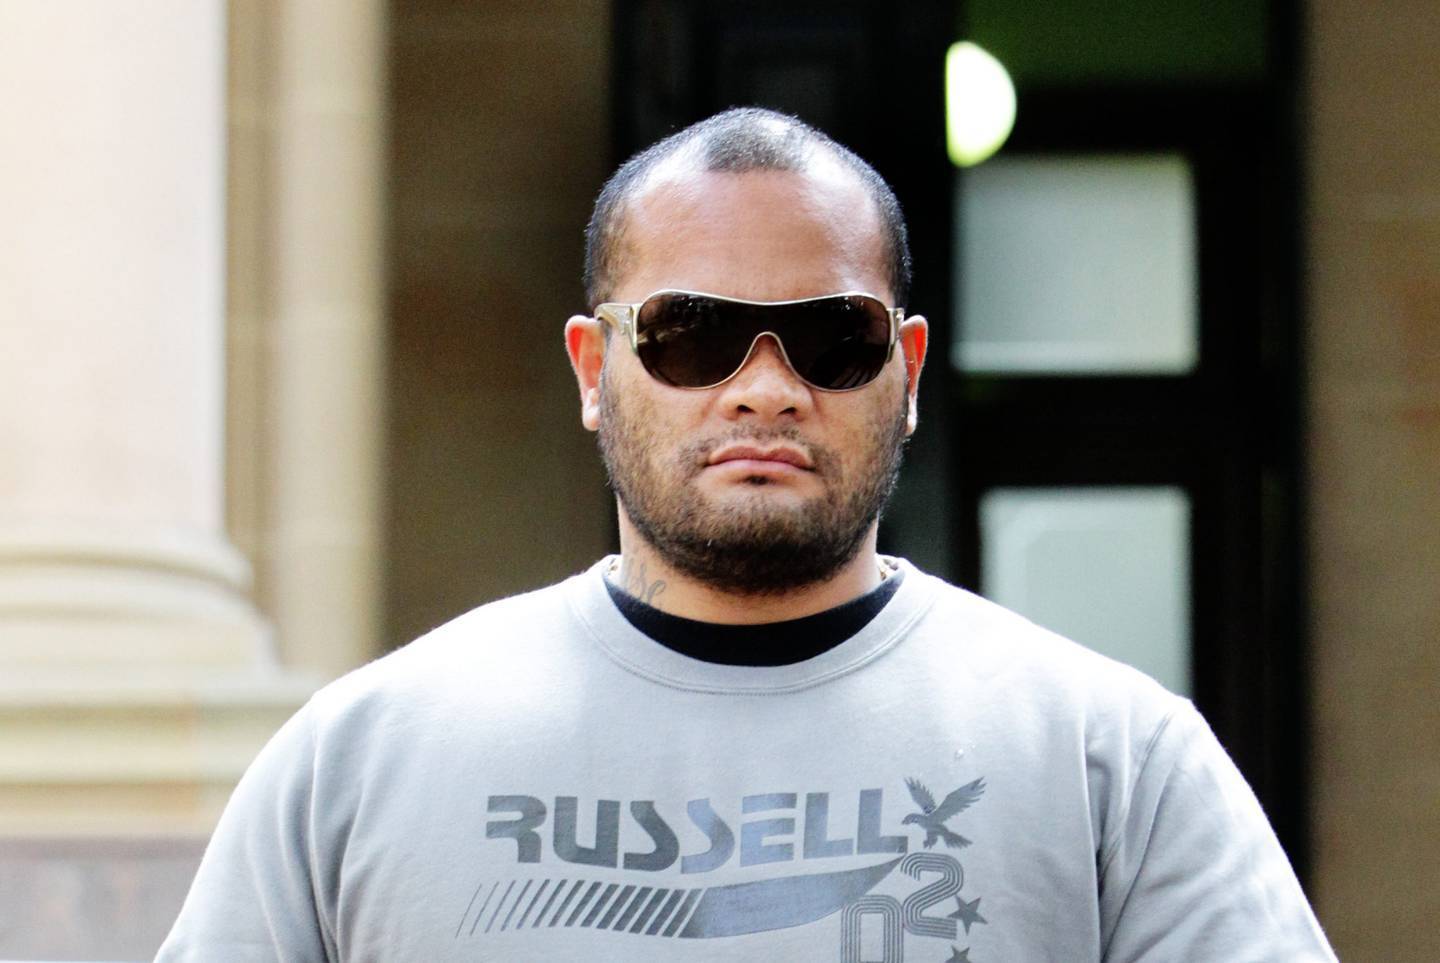 A well-known entertainer has been charged with money laundering $6 million in a conspiracy with Duax Ngakuru, pictured, who is alleged to have imported drugs into NZ. Photo / Daily Telegraph